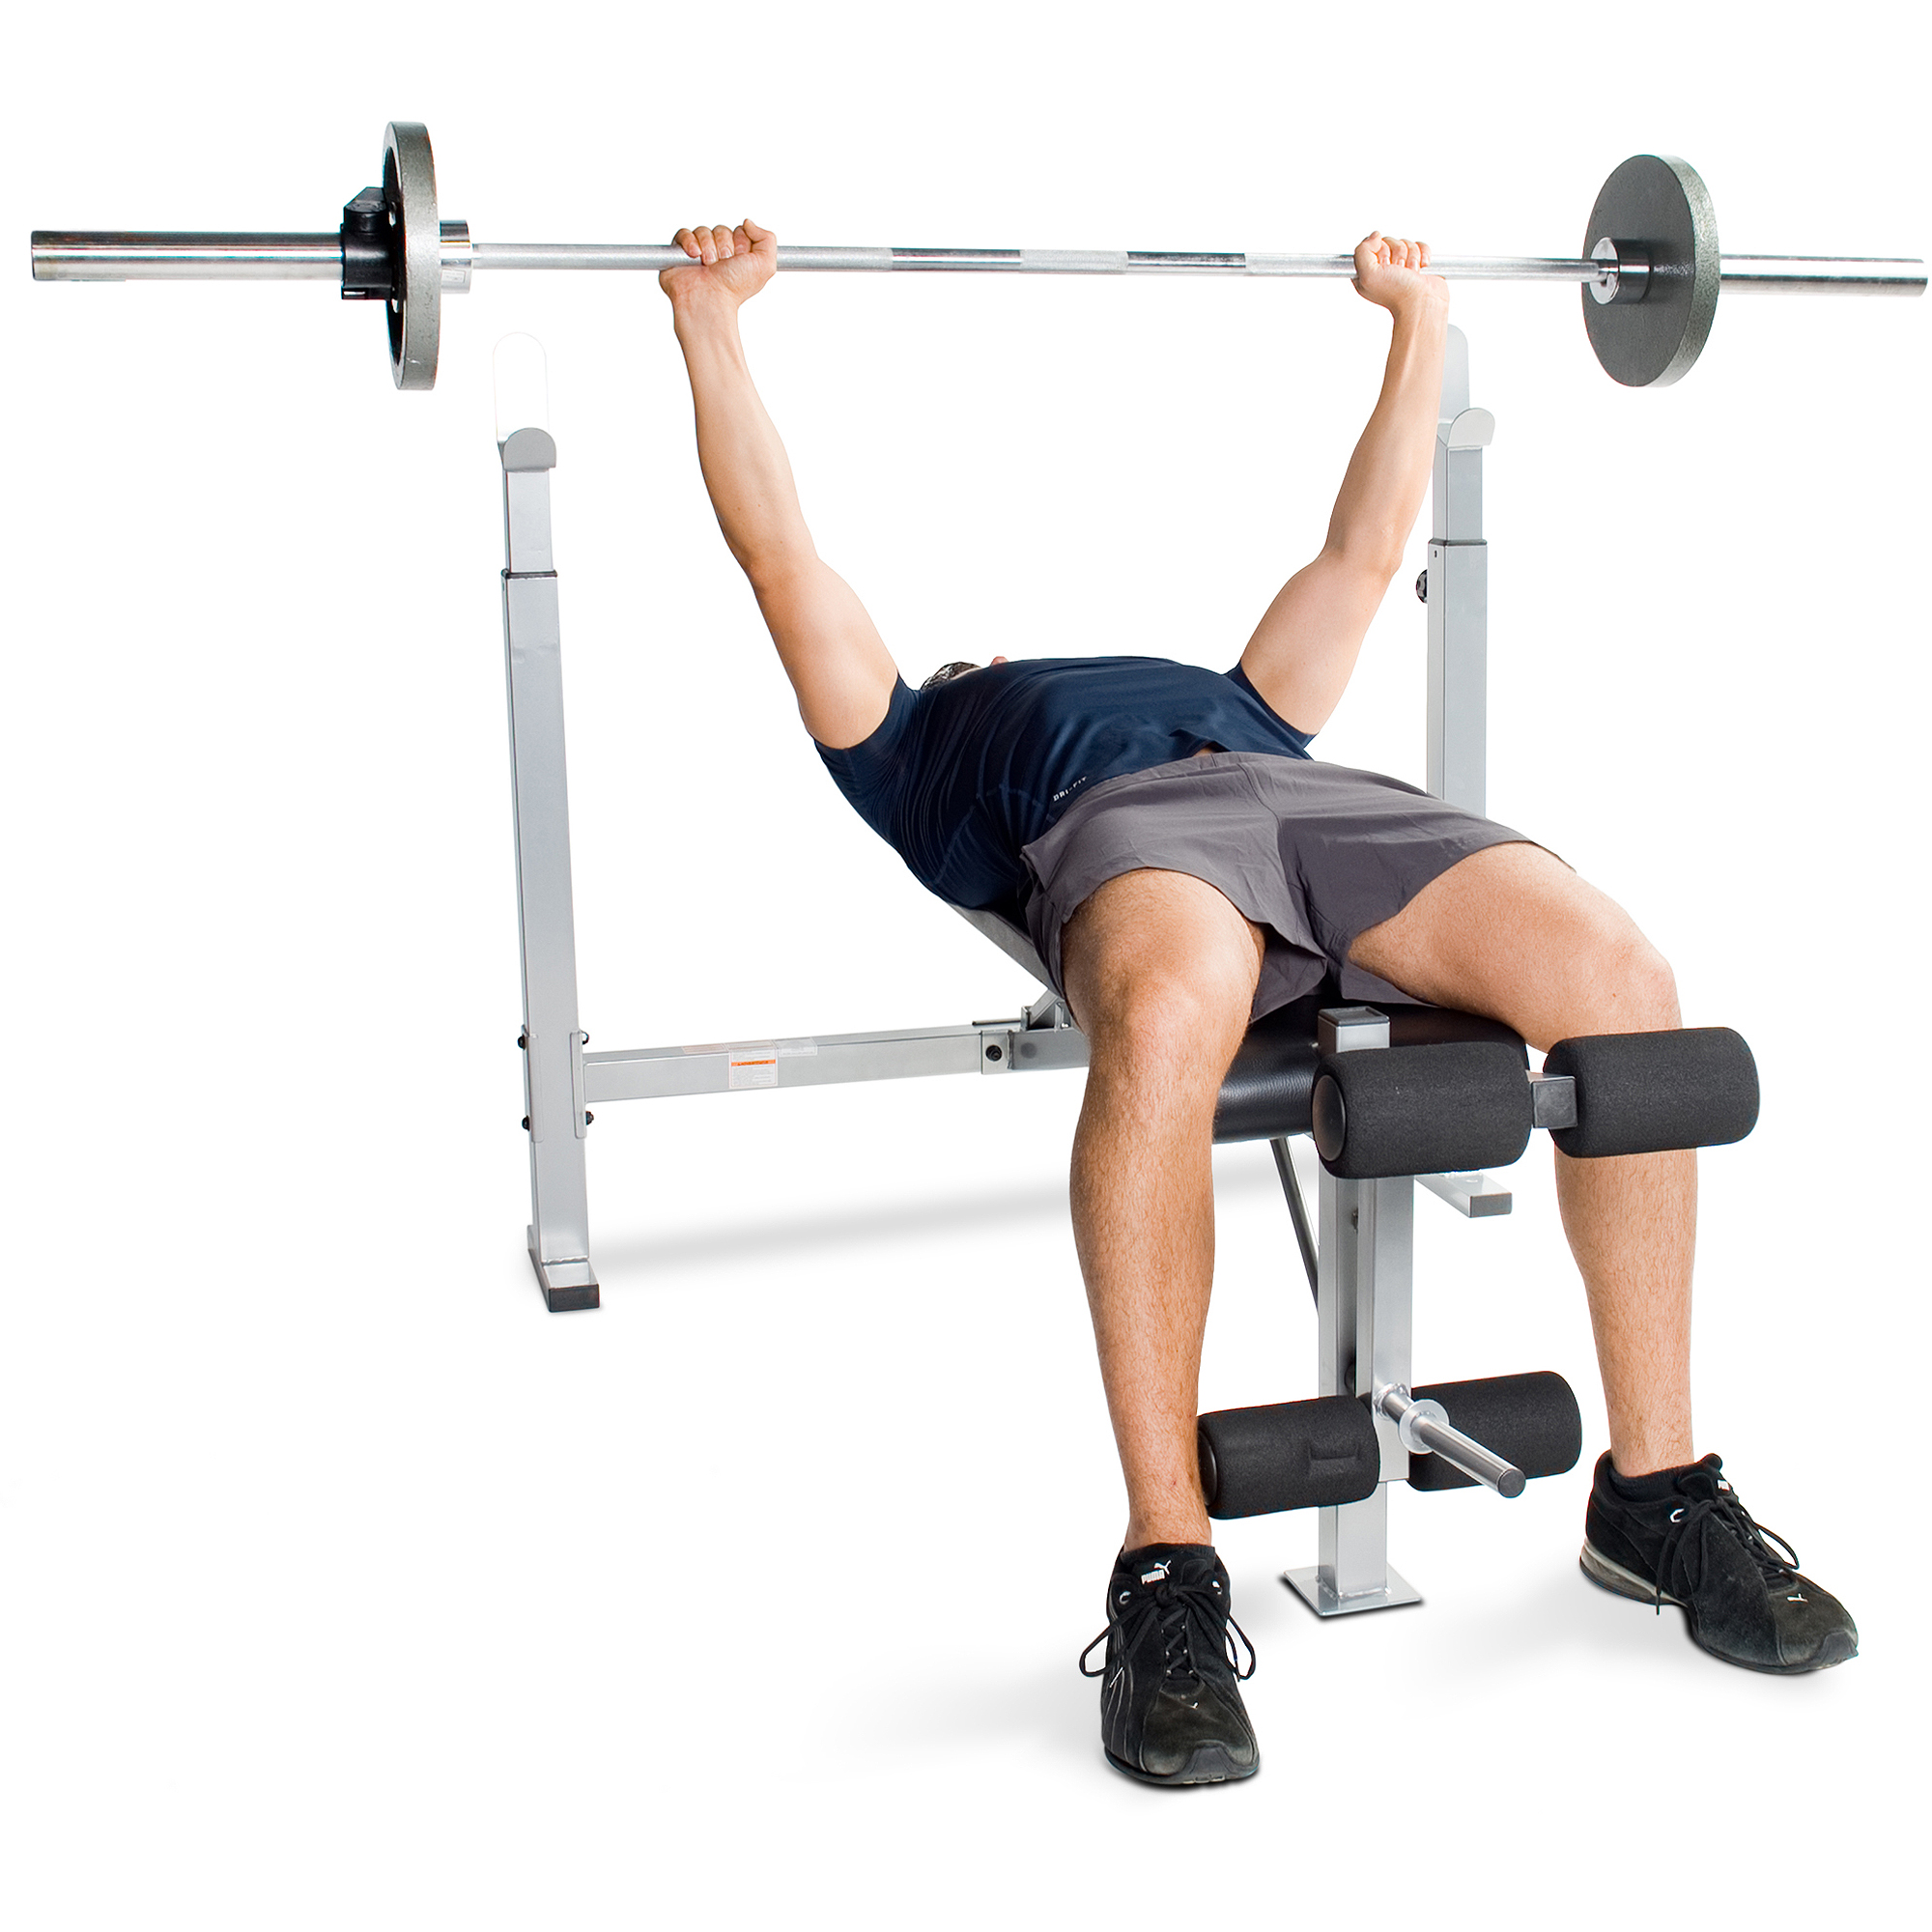 CAP Strength Olympic Weight Bench - image 4 of 6